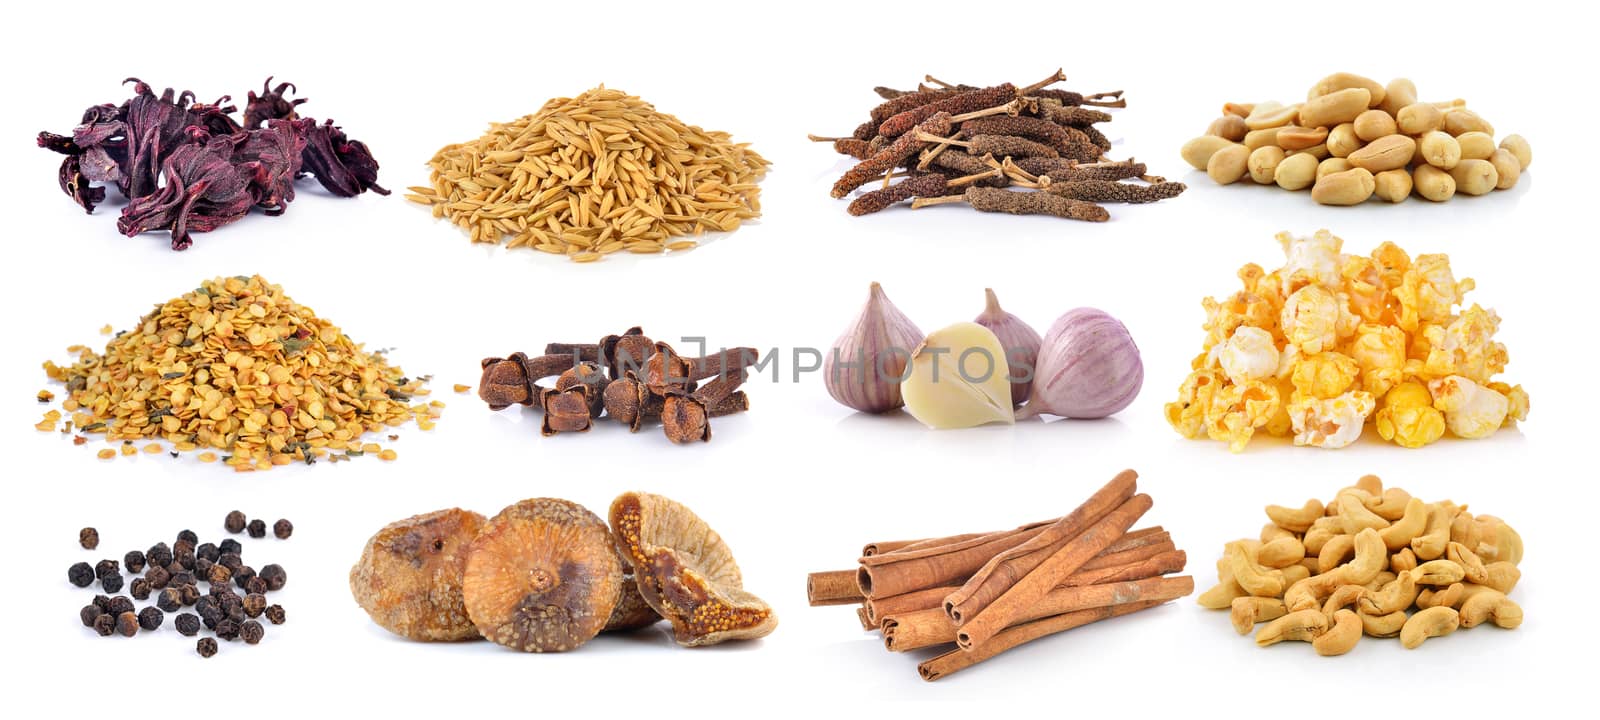 Dried figs, pepper corn, chili seeds, Spice cloves, rice grains, by sommai